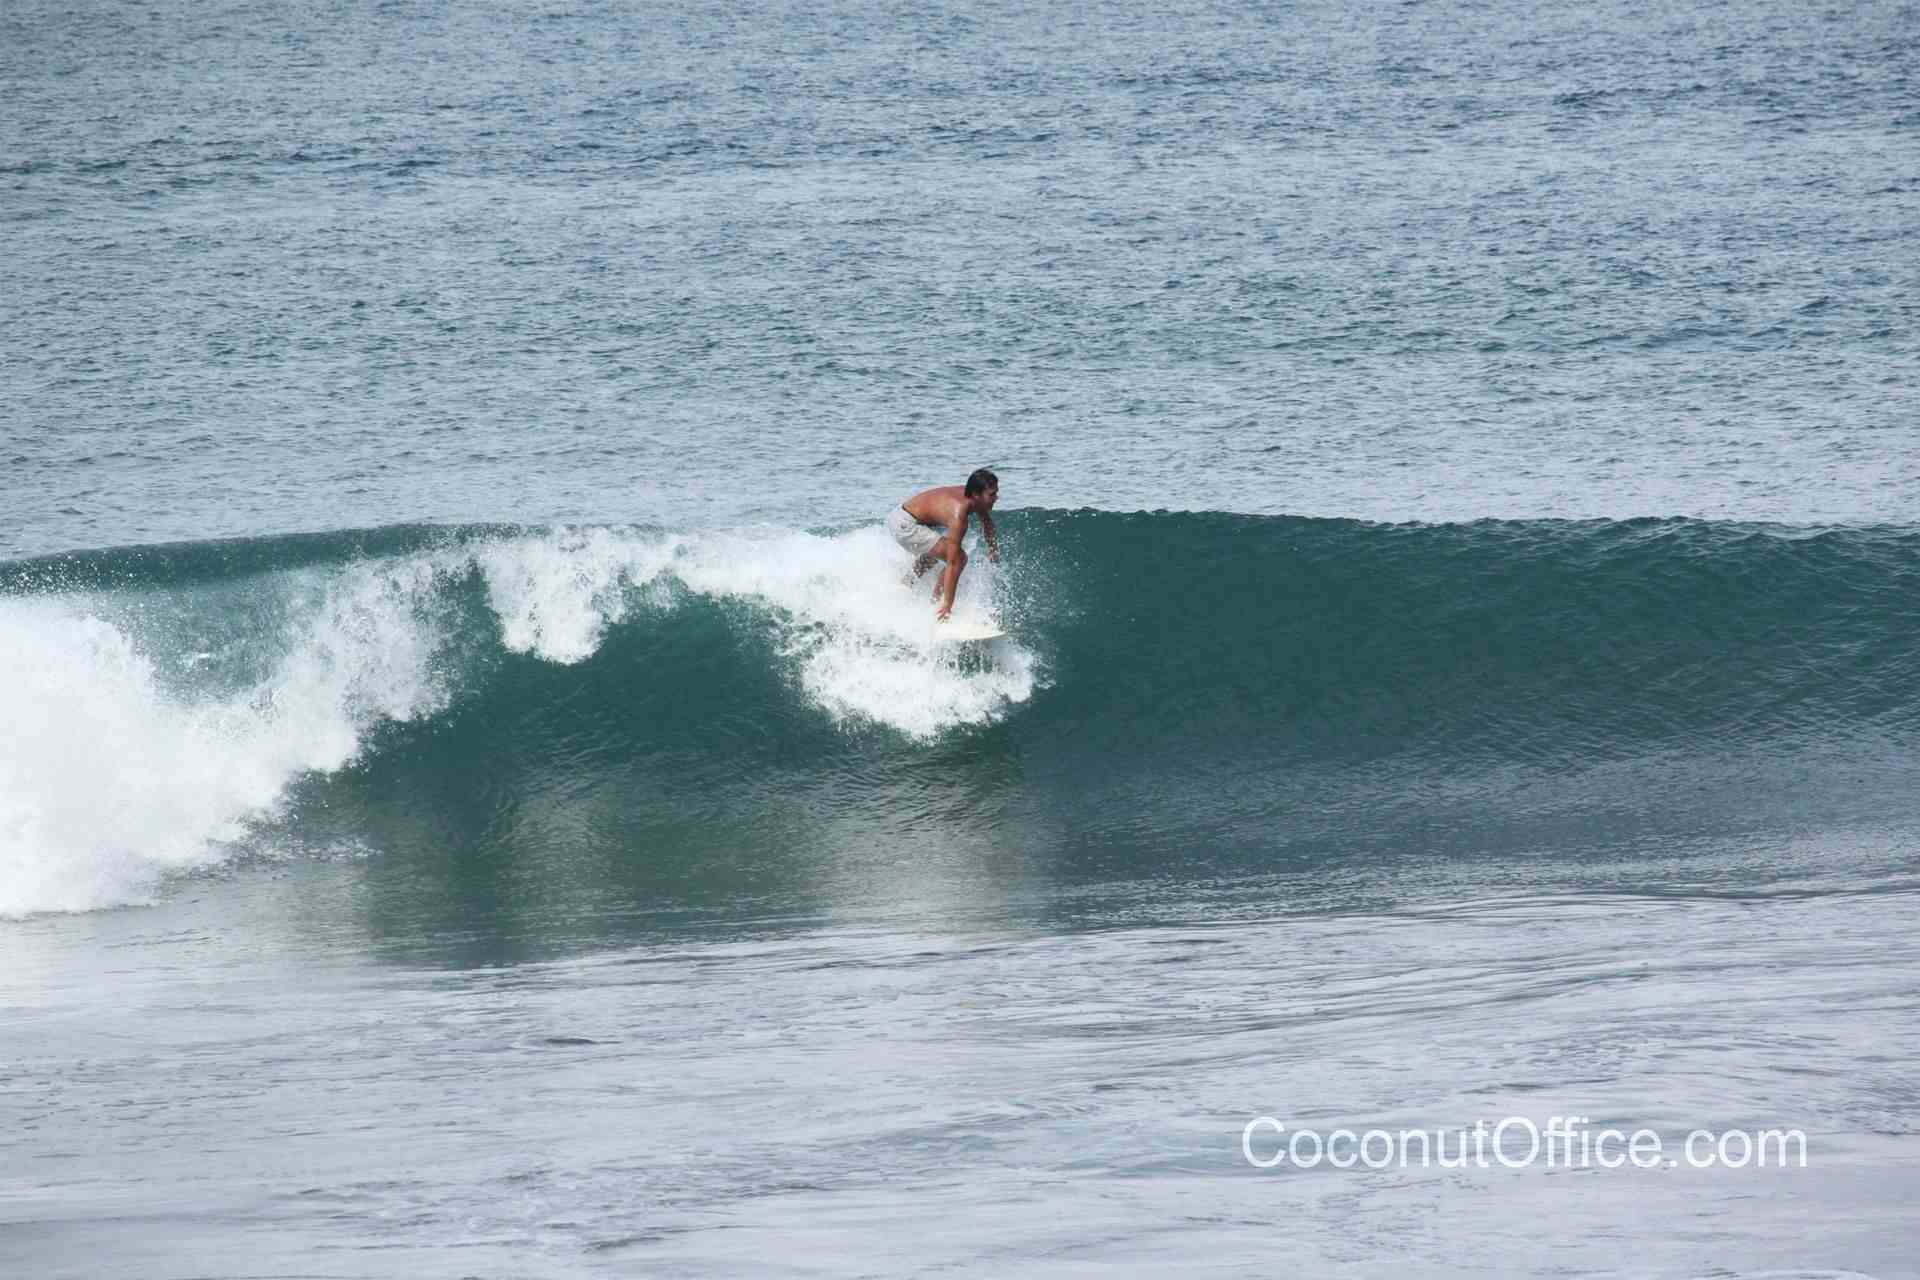 You can find lefts and rights in Playa Hermosa.